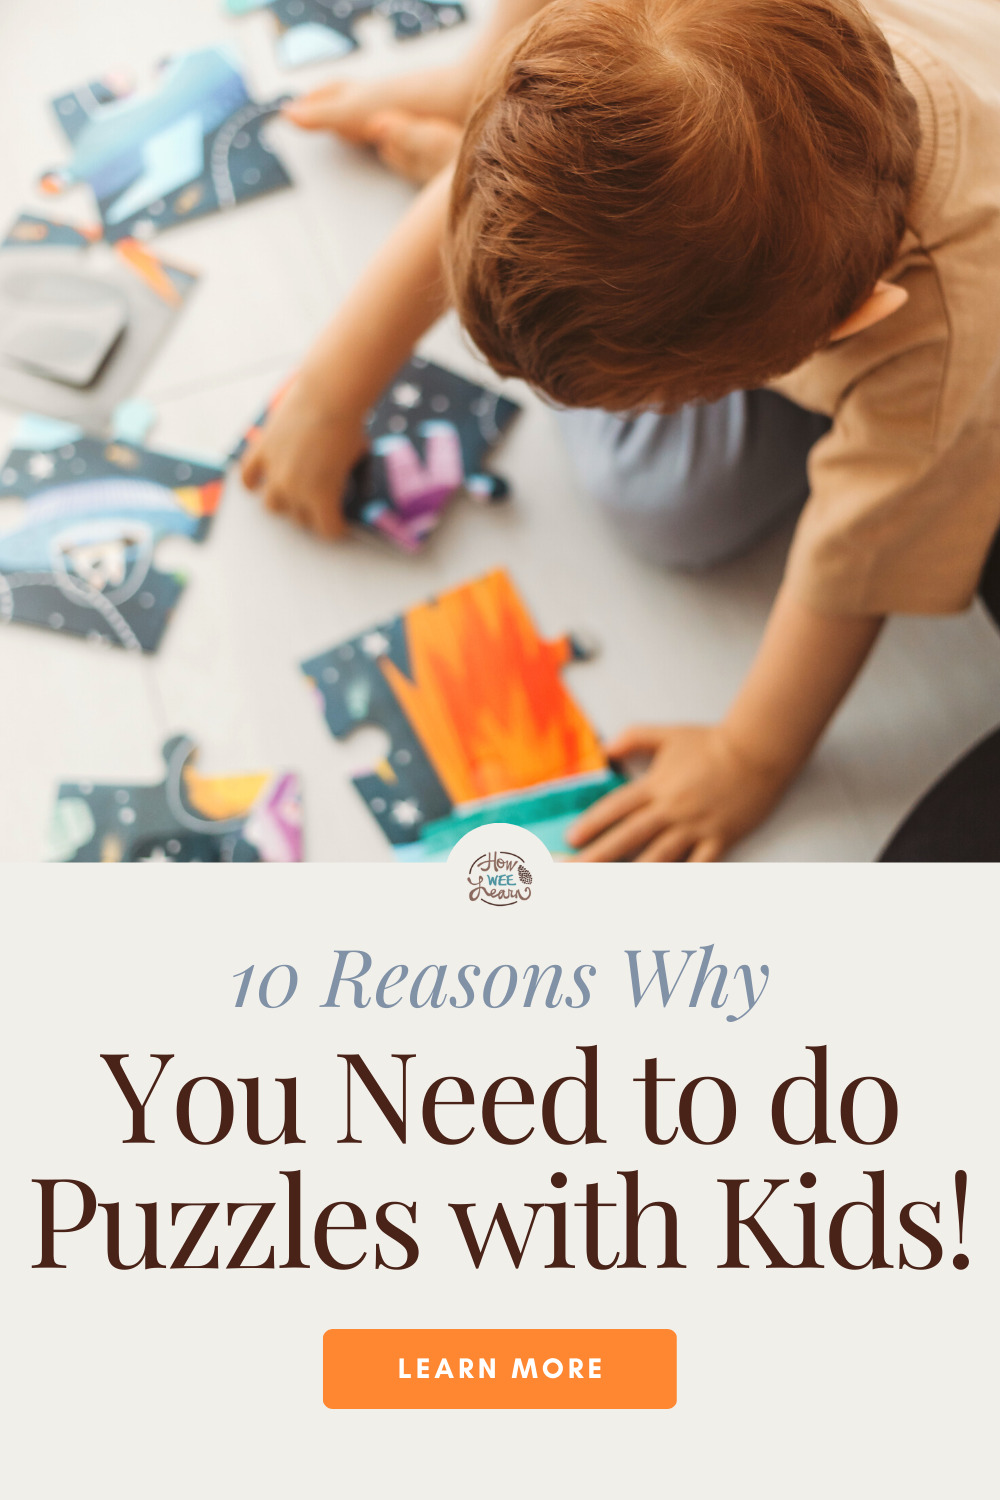 10 Reasons Why You Need to do Puzzles with Kids!